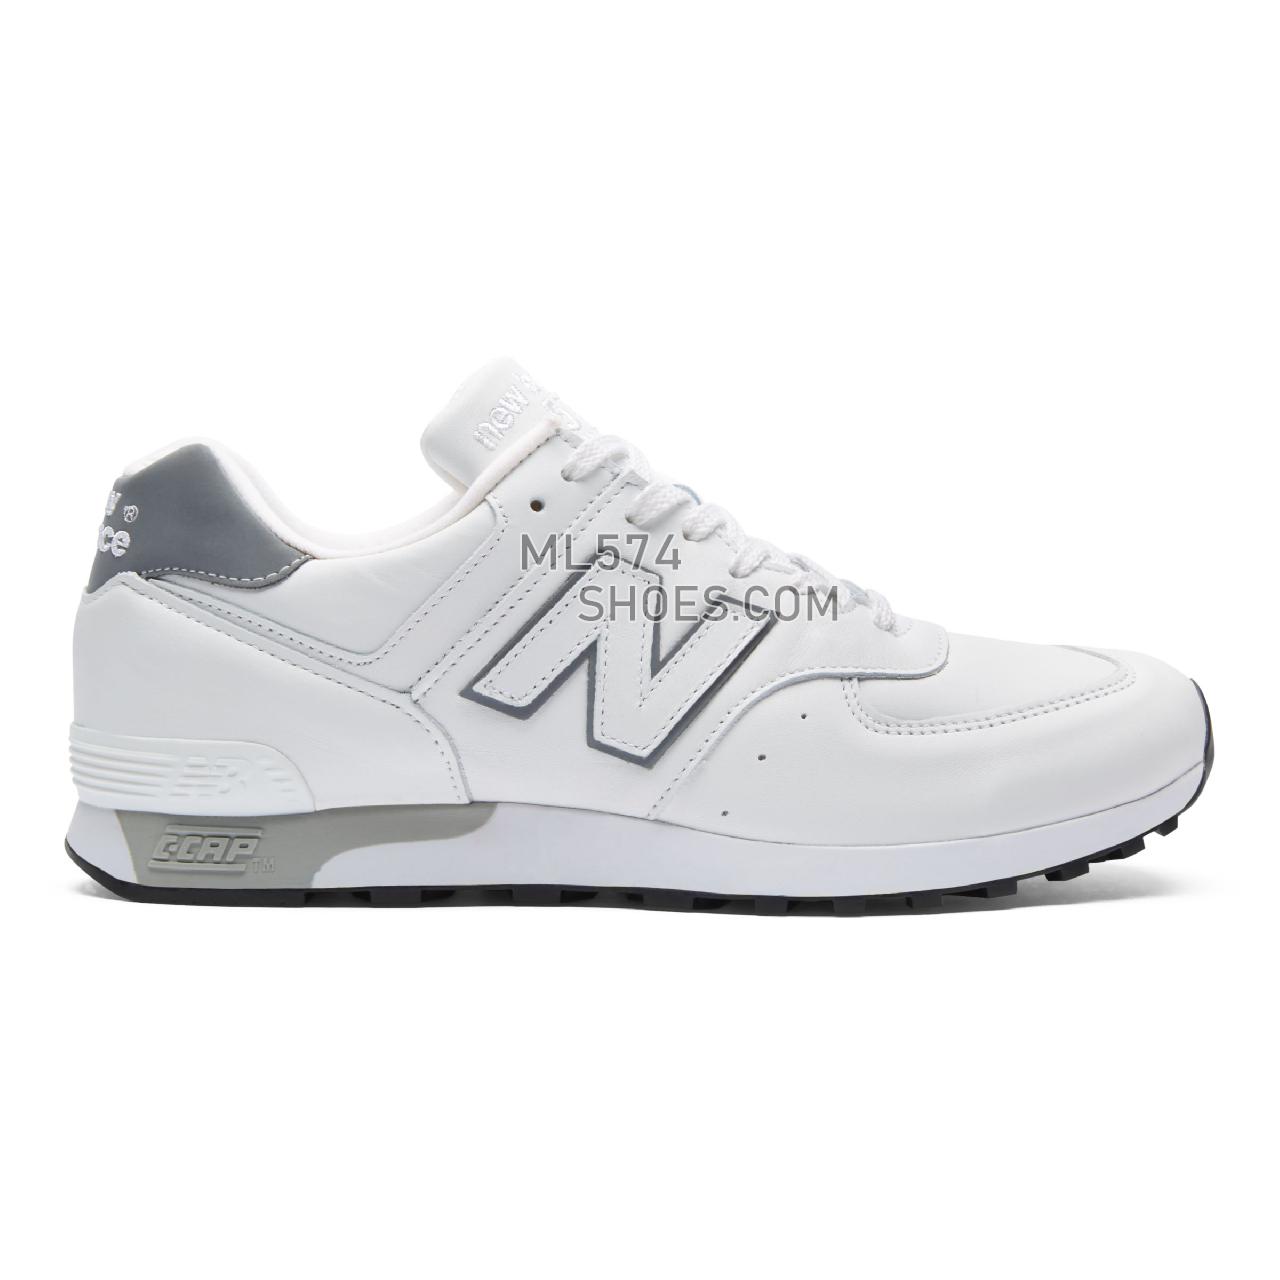 New Balance Made in UK 576 - Men's 576 Made in UK Classic M576-LL - White with Silver and Black - M576WWL